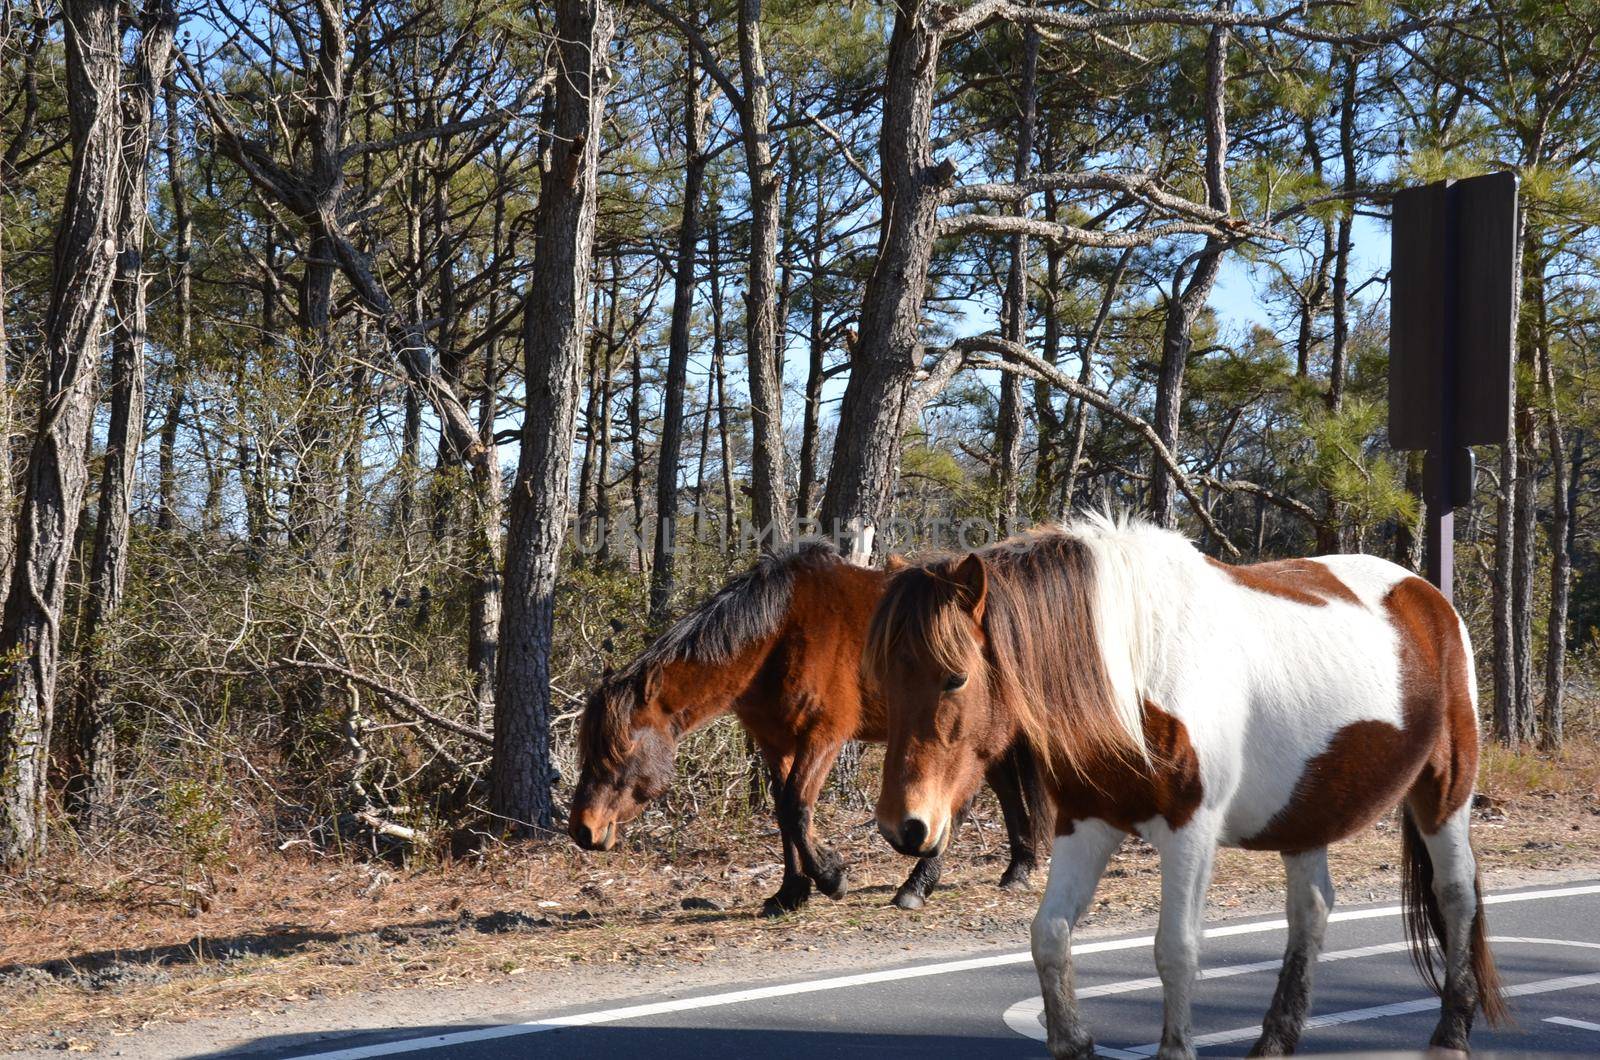 brown and white wild horses walking on the road by stockphotofan1